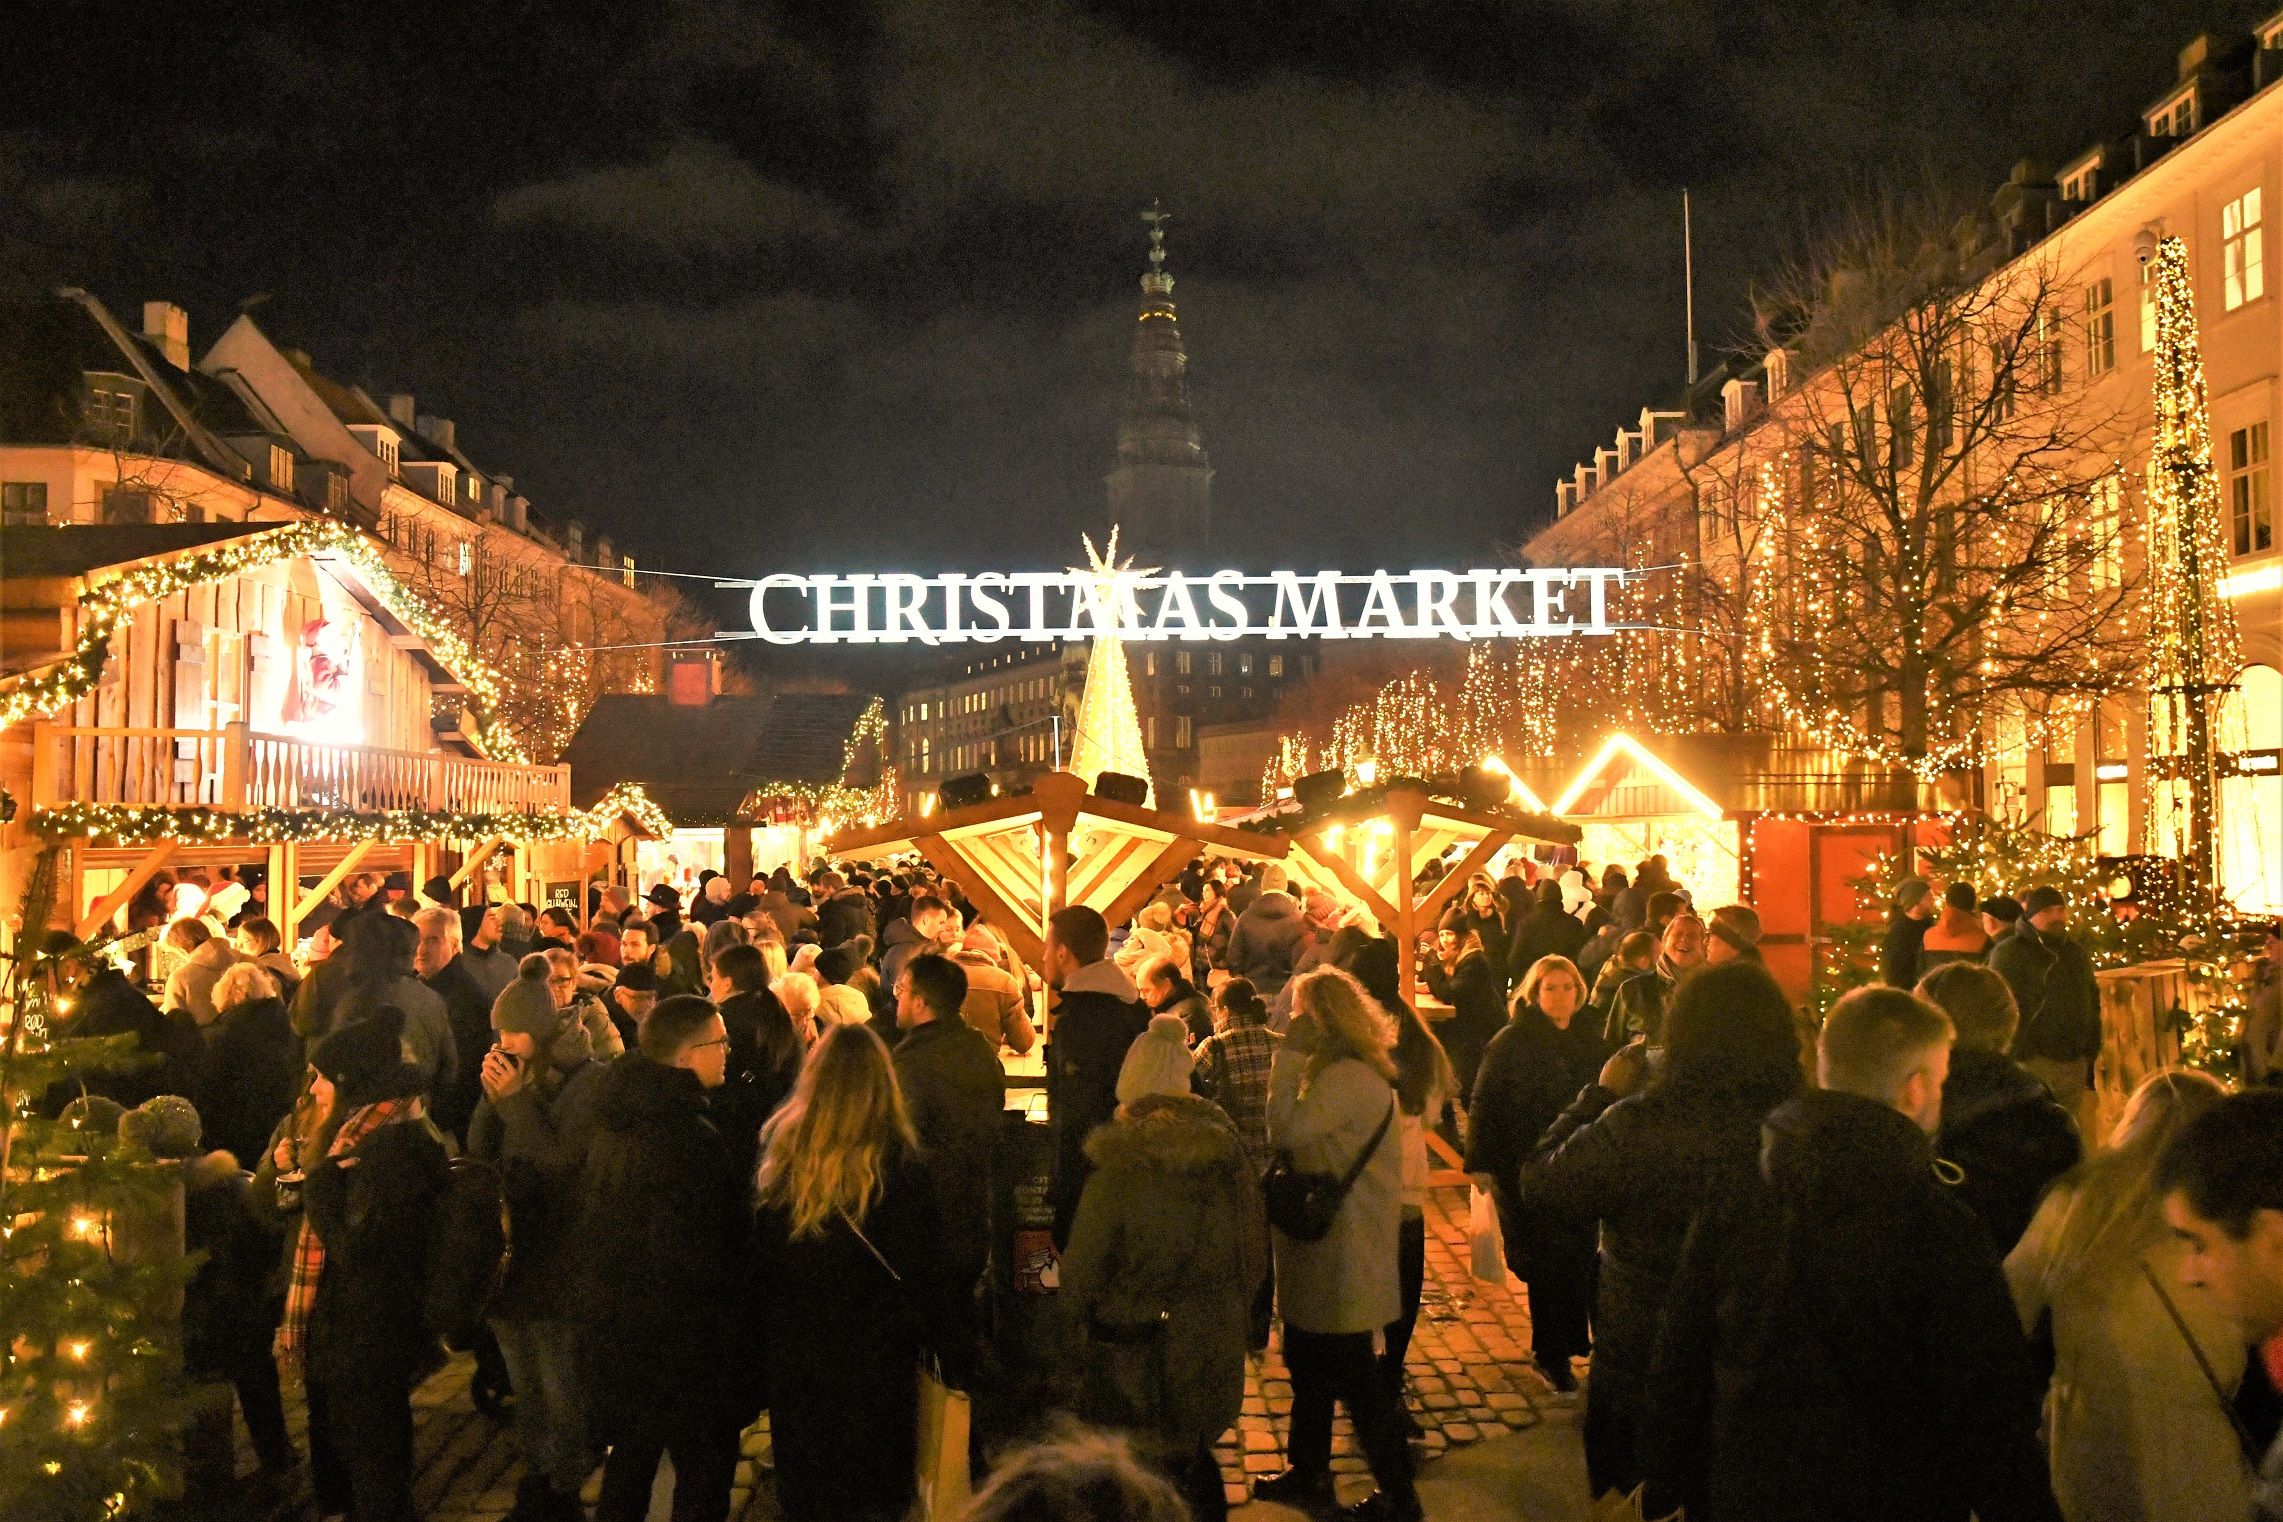 Among these festive markets, there could be the gem that makes this a completely classic Christmas